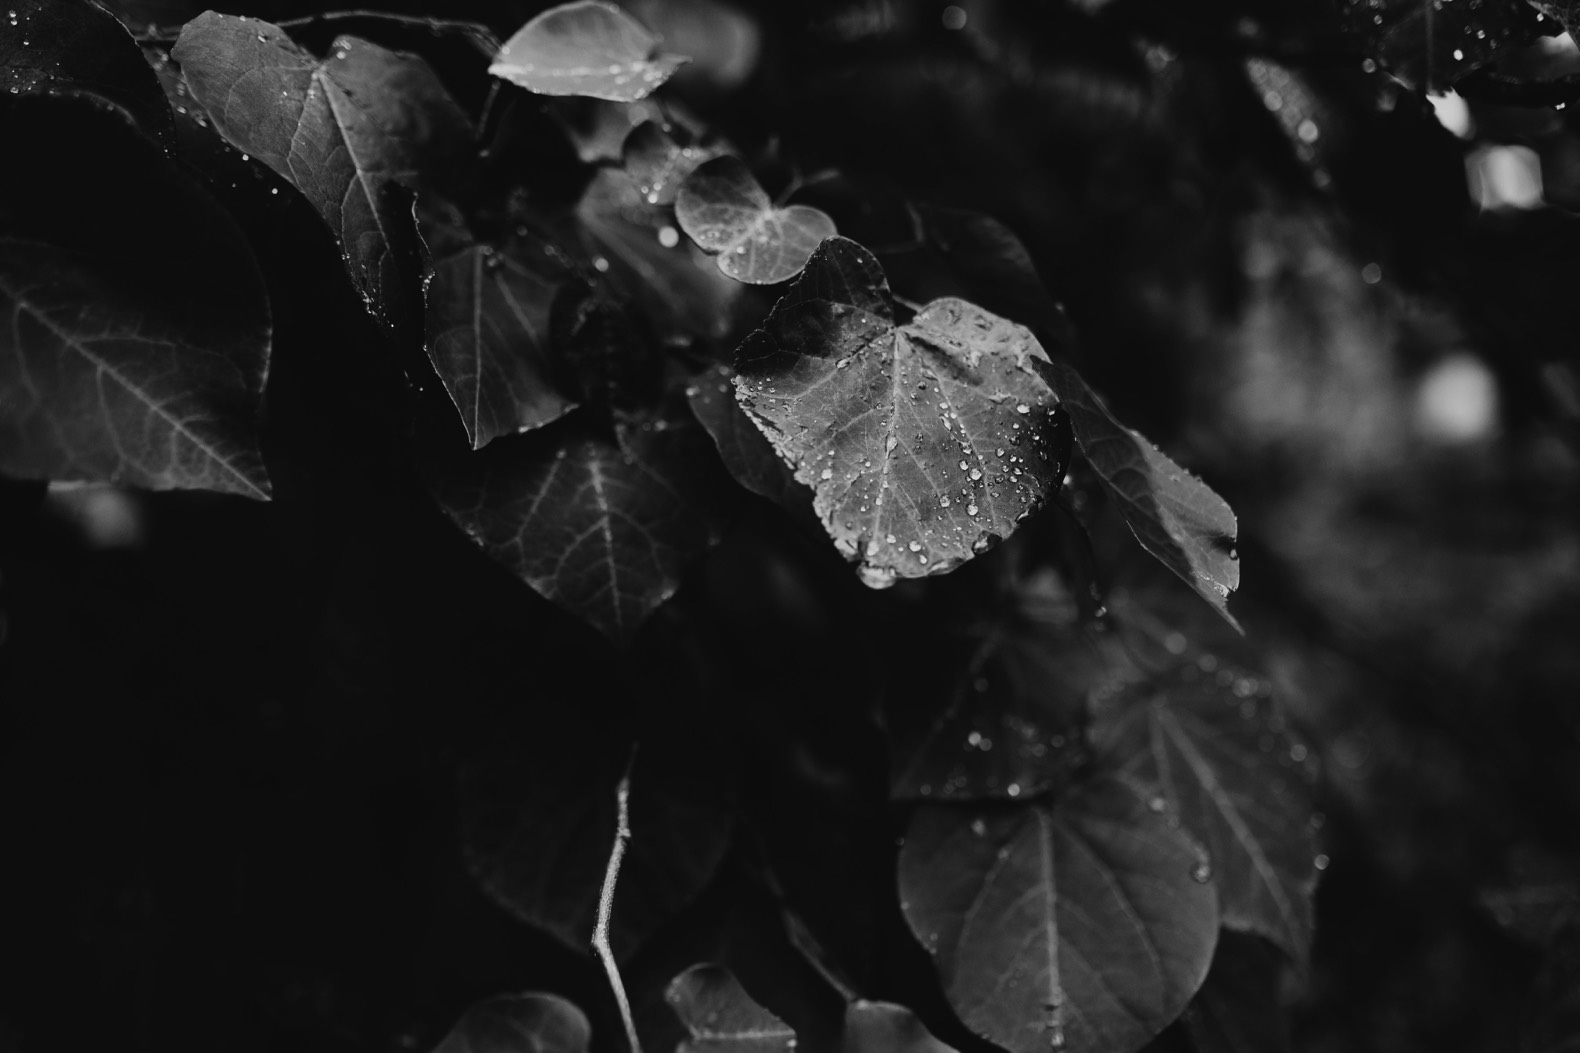 thornbury lodge stanthorpe black and white photo of leaves with raindrops